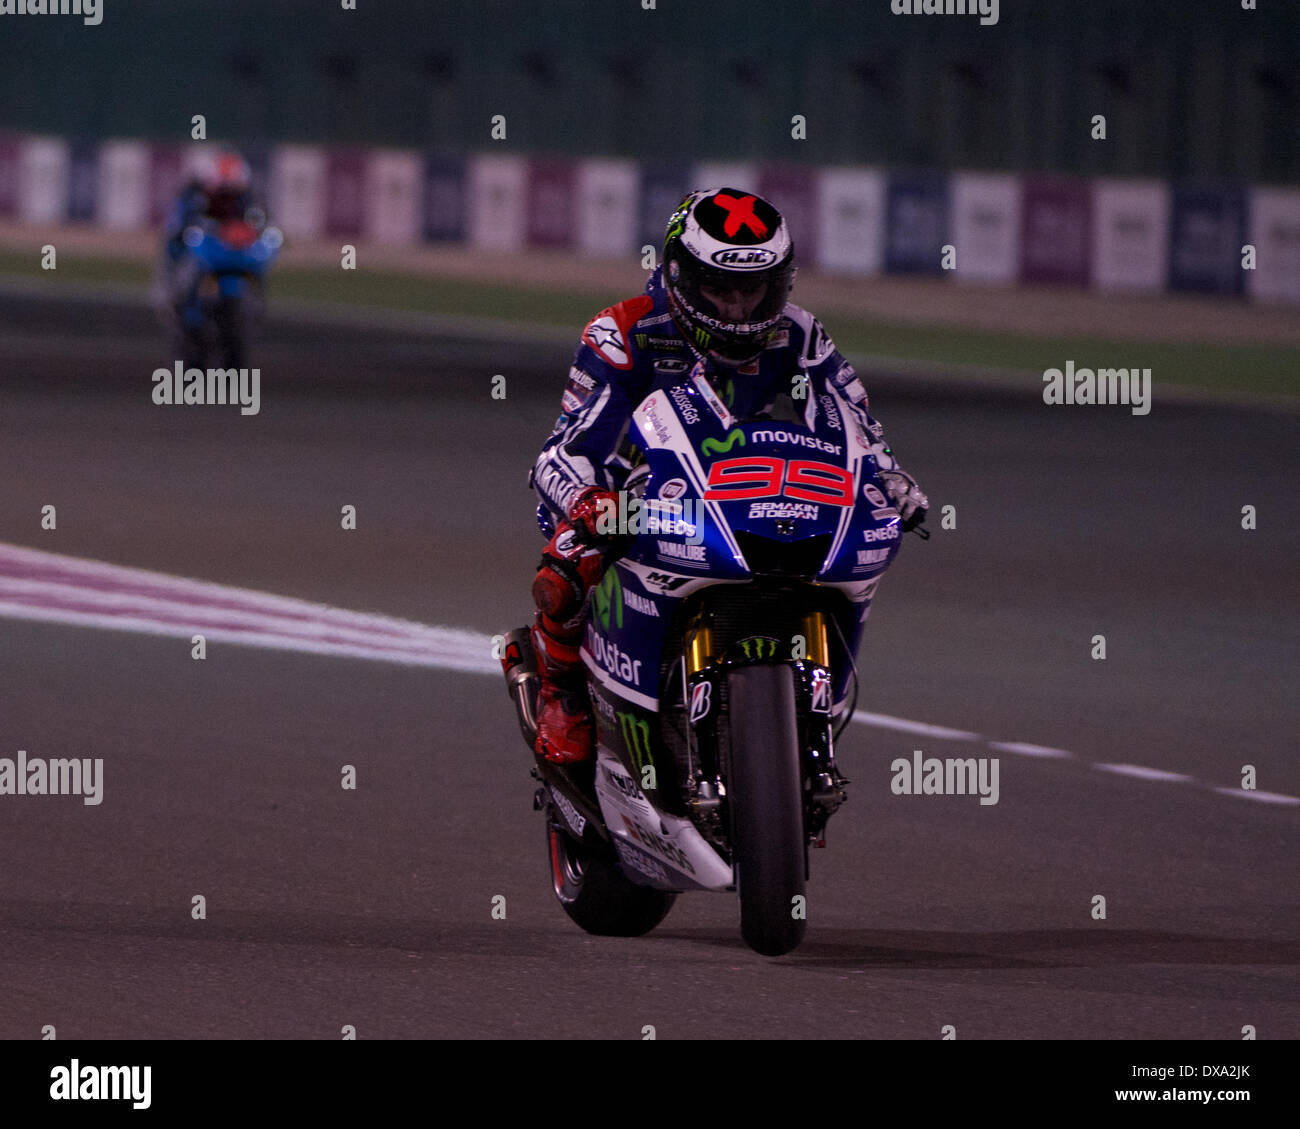 Losail Circuit, Qatar. 20th March 2014.  Jorge Lorenzo the Yamaha Factory Racing rider leaves the Losail Pit Lane on his Yamaha YZR-M1 for free practice session on the 2014 FIM MotoGP World Championship Credit:  Tom Morgan/Alamy Live News Stock Photo